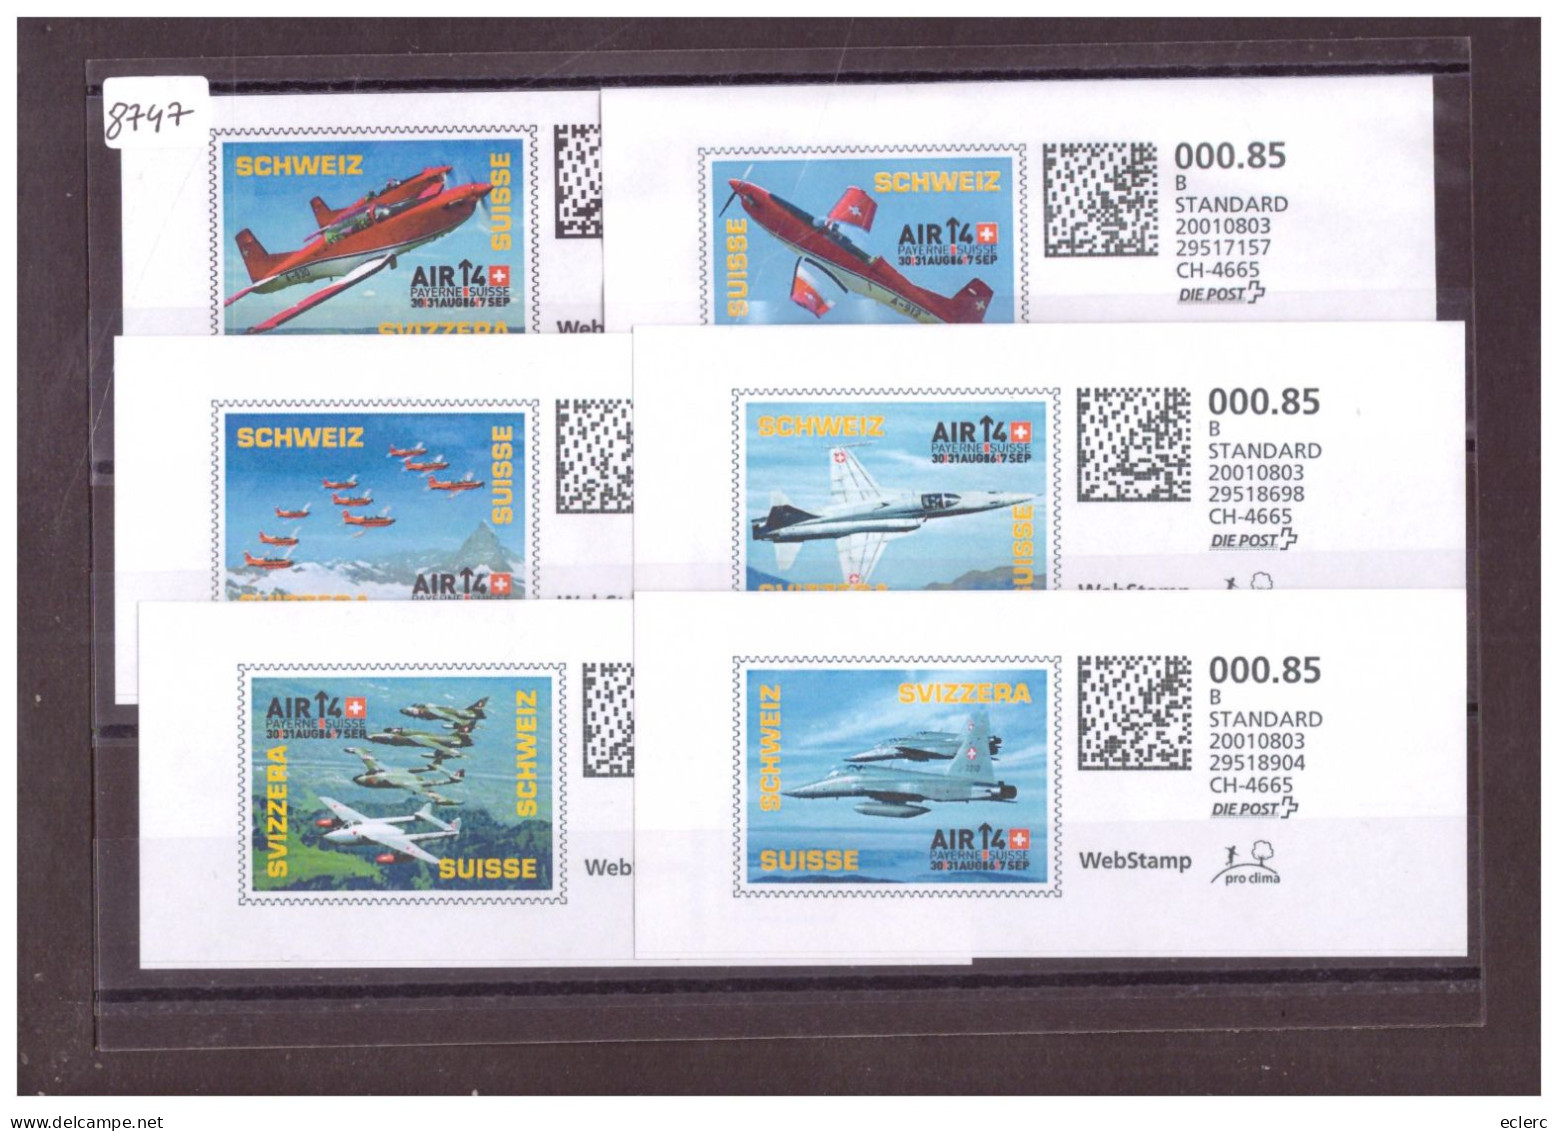 6 WEB STAMPS - AVIATION SUISSE - MEETING DE PAYERNE - IMAGES DIFFERENTES - Automatic Stamps